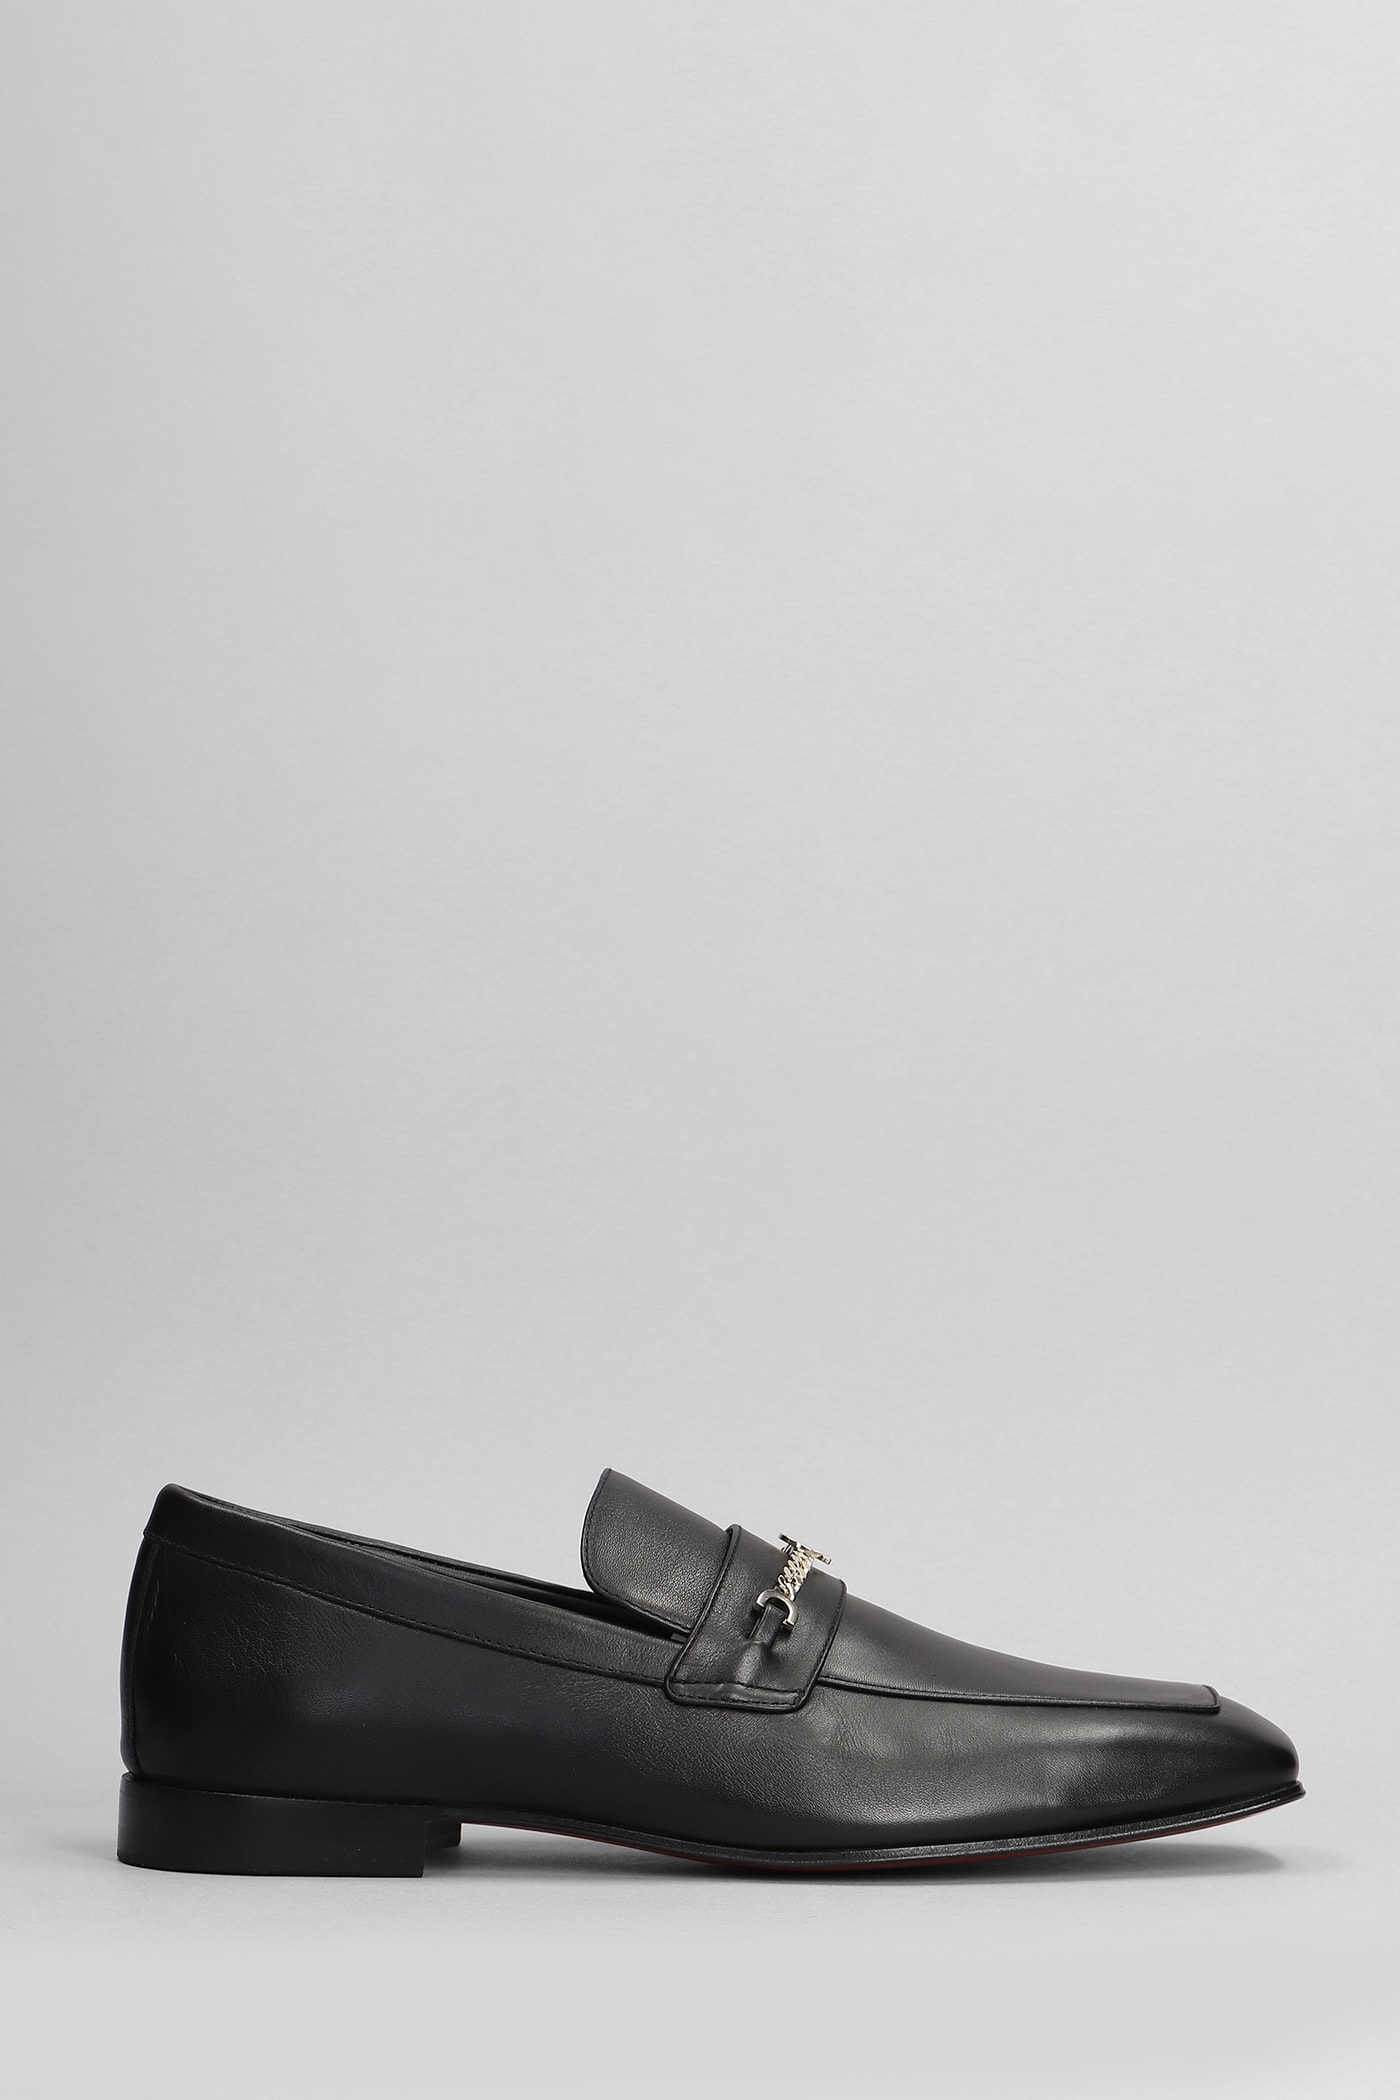 Christian Louboutin Mj Moc Loafers In Black Leather